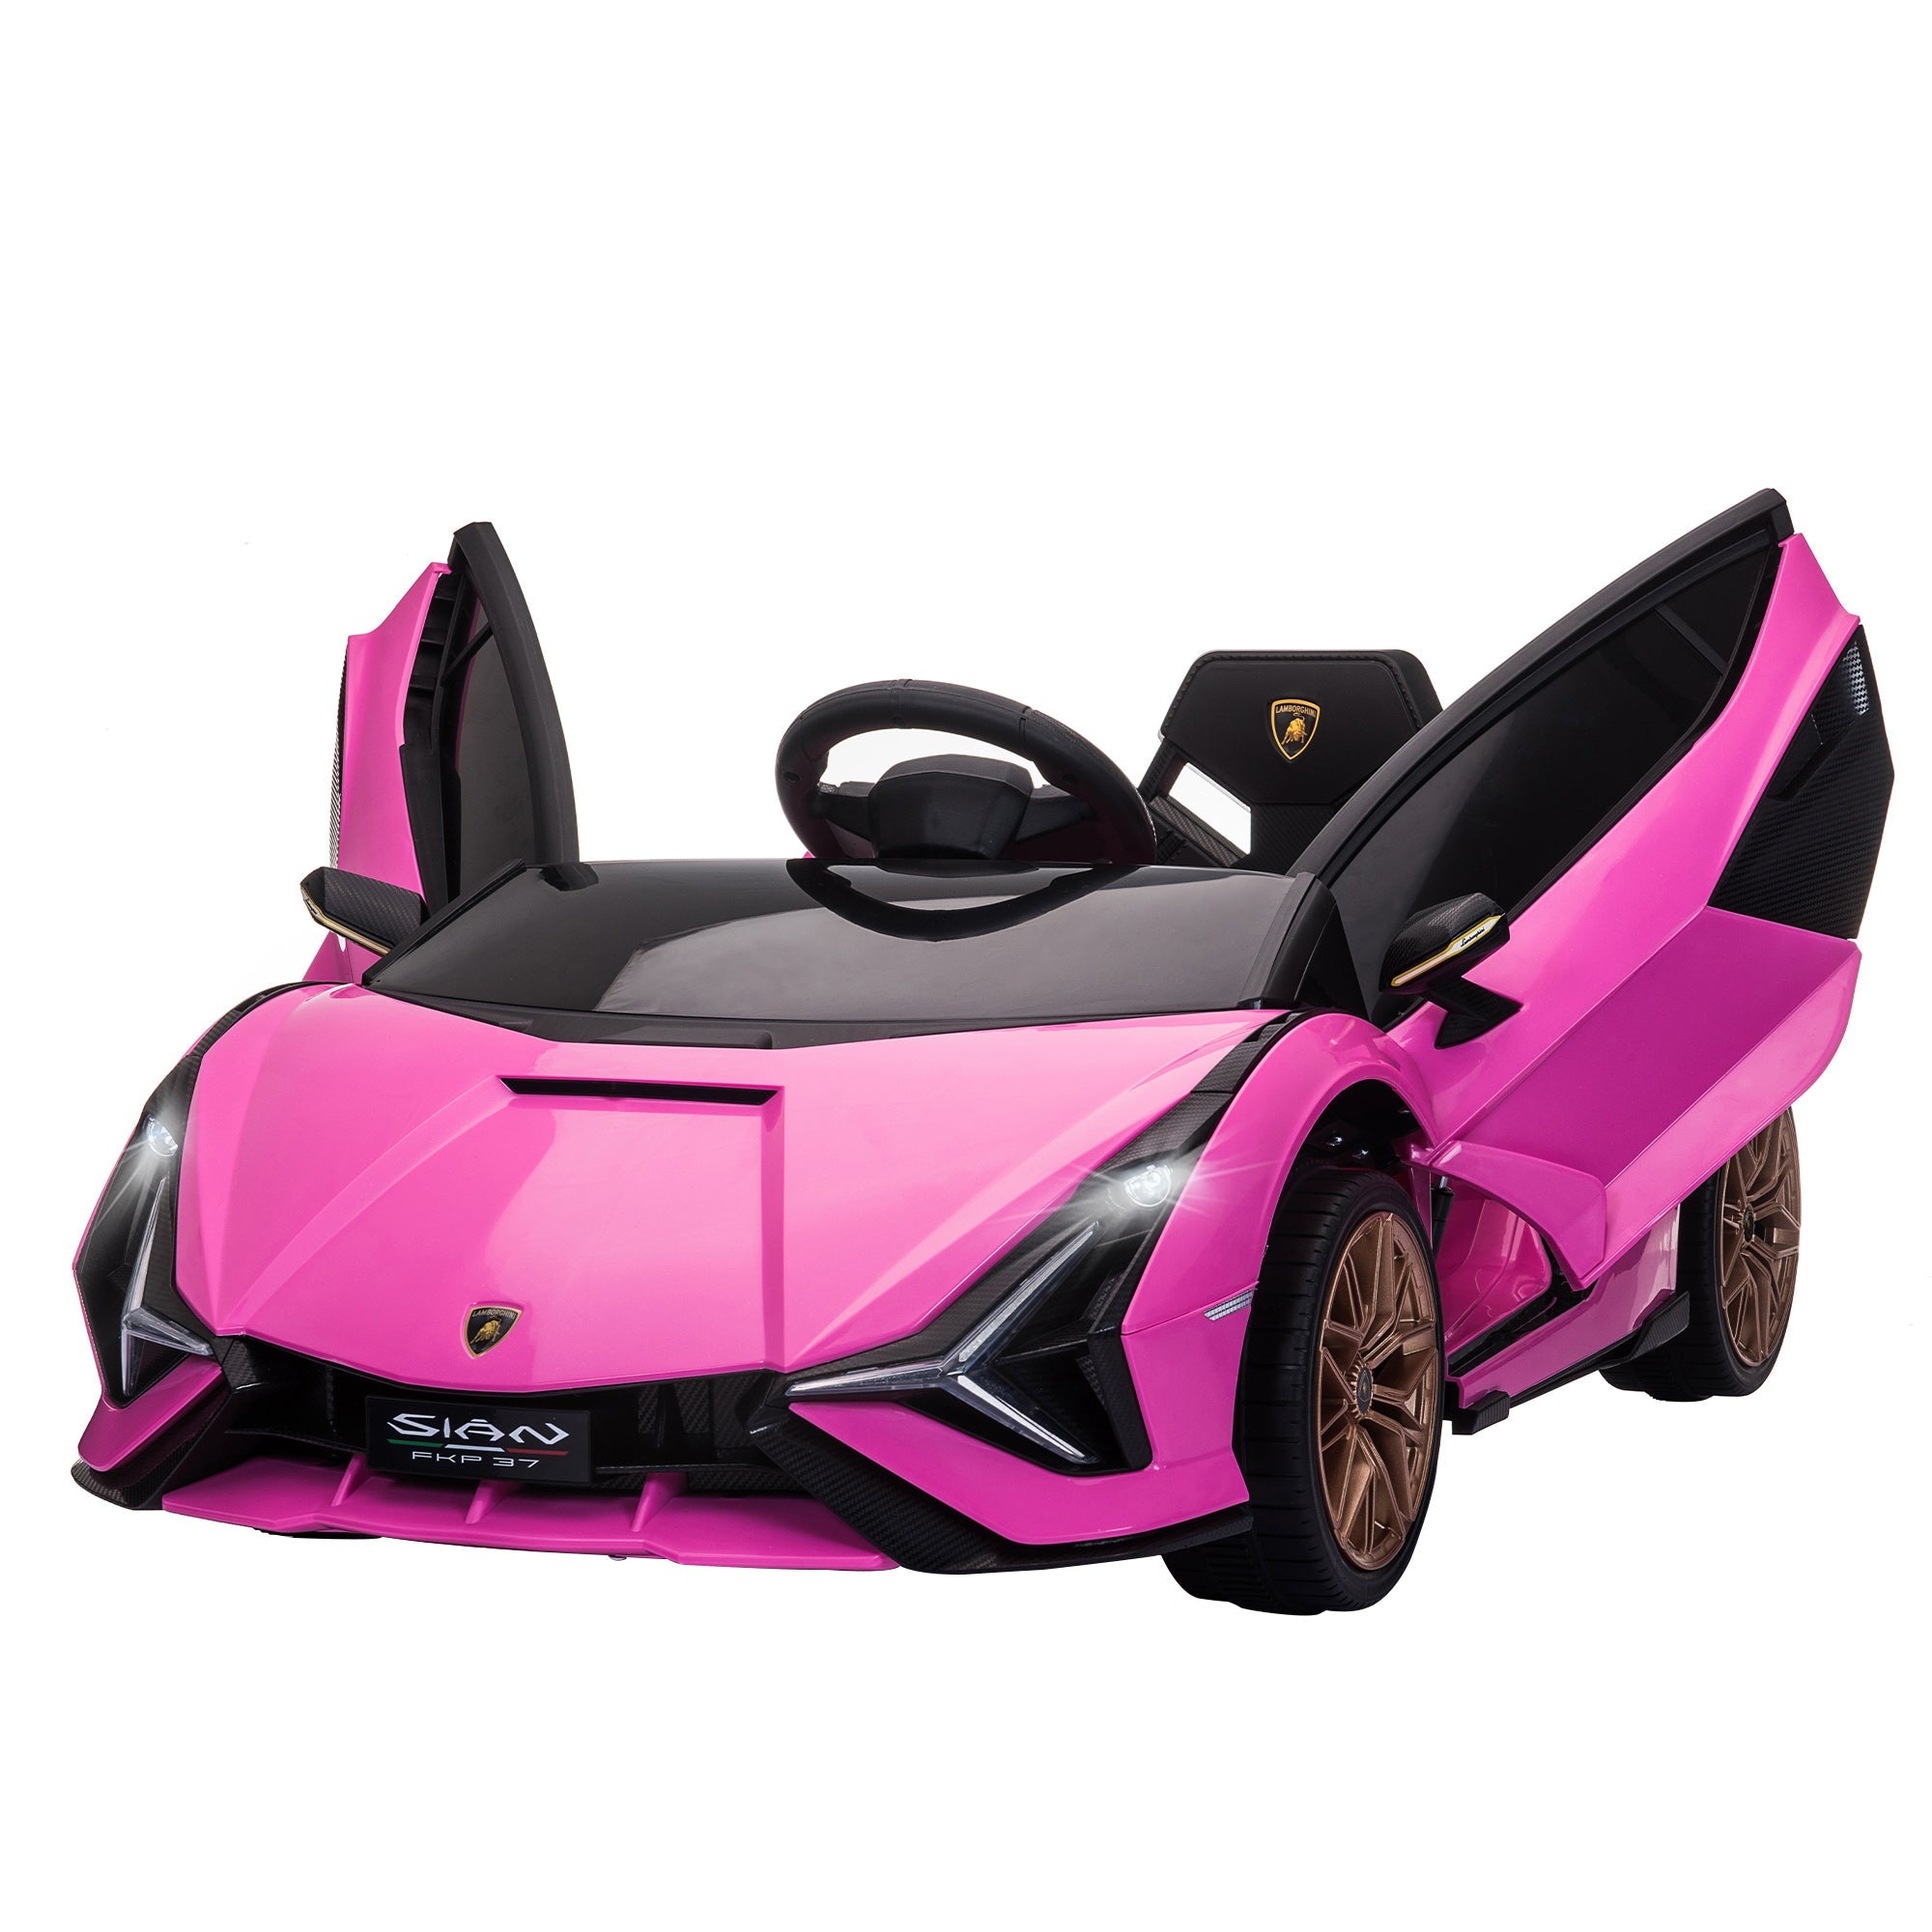 HOMCOM Licensed Lamborghini 12V Kids Electric Ride On Car with Remote Control (Pink)